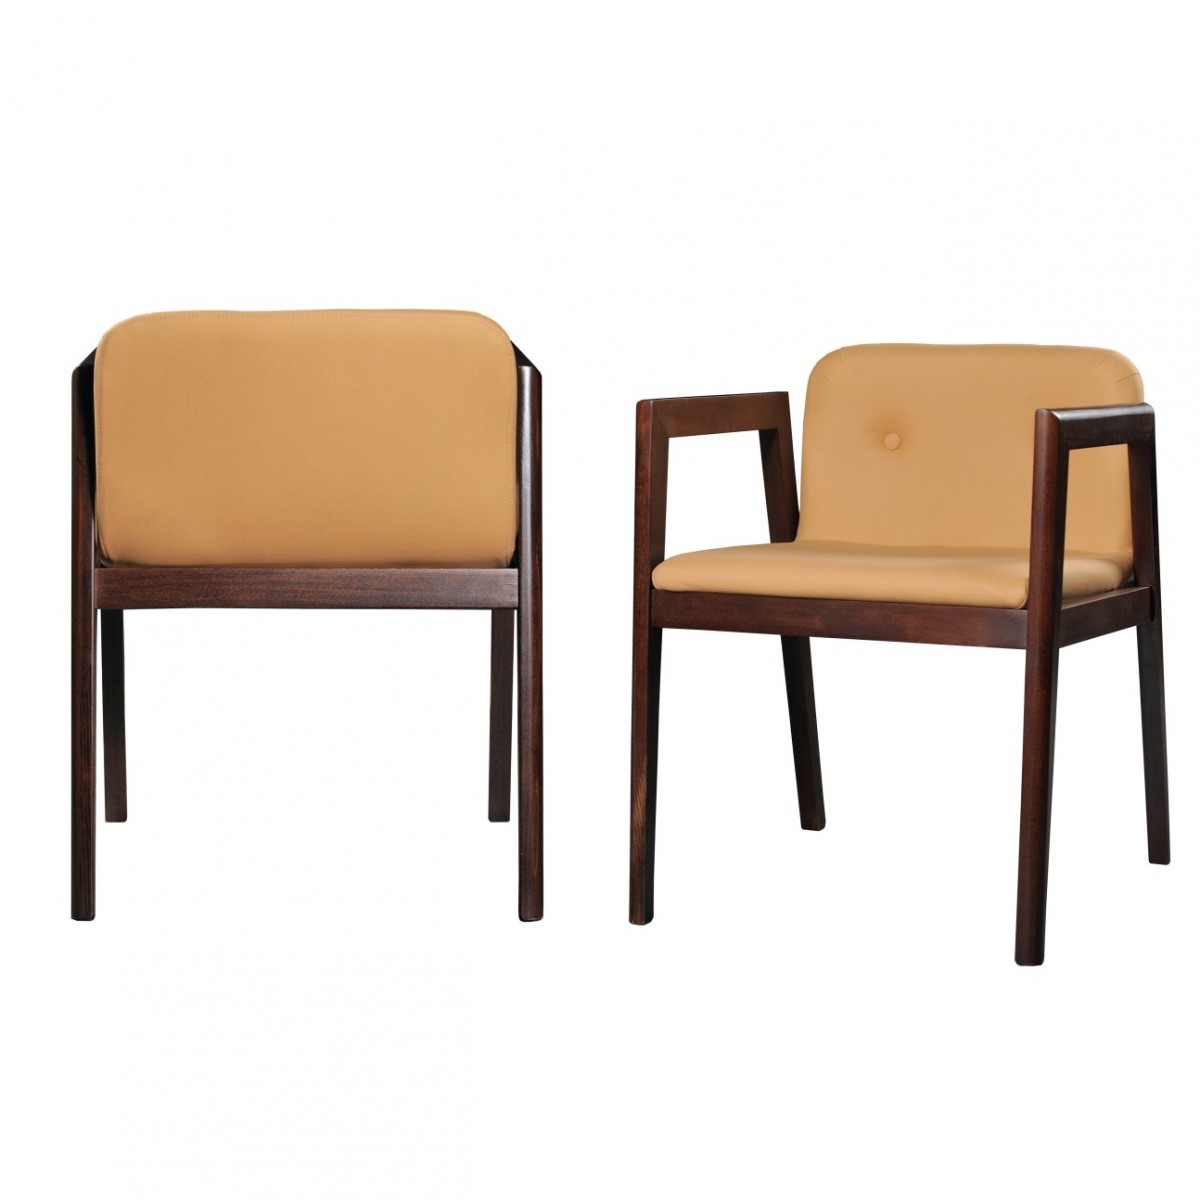 Set of Two Beige Modern Faux Leather Dining Chairs